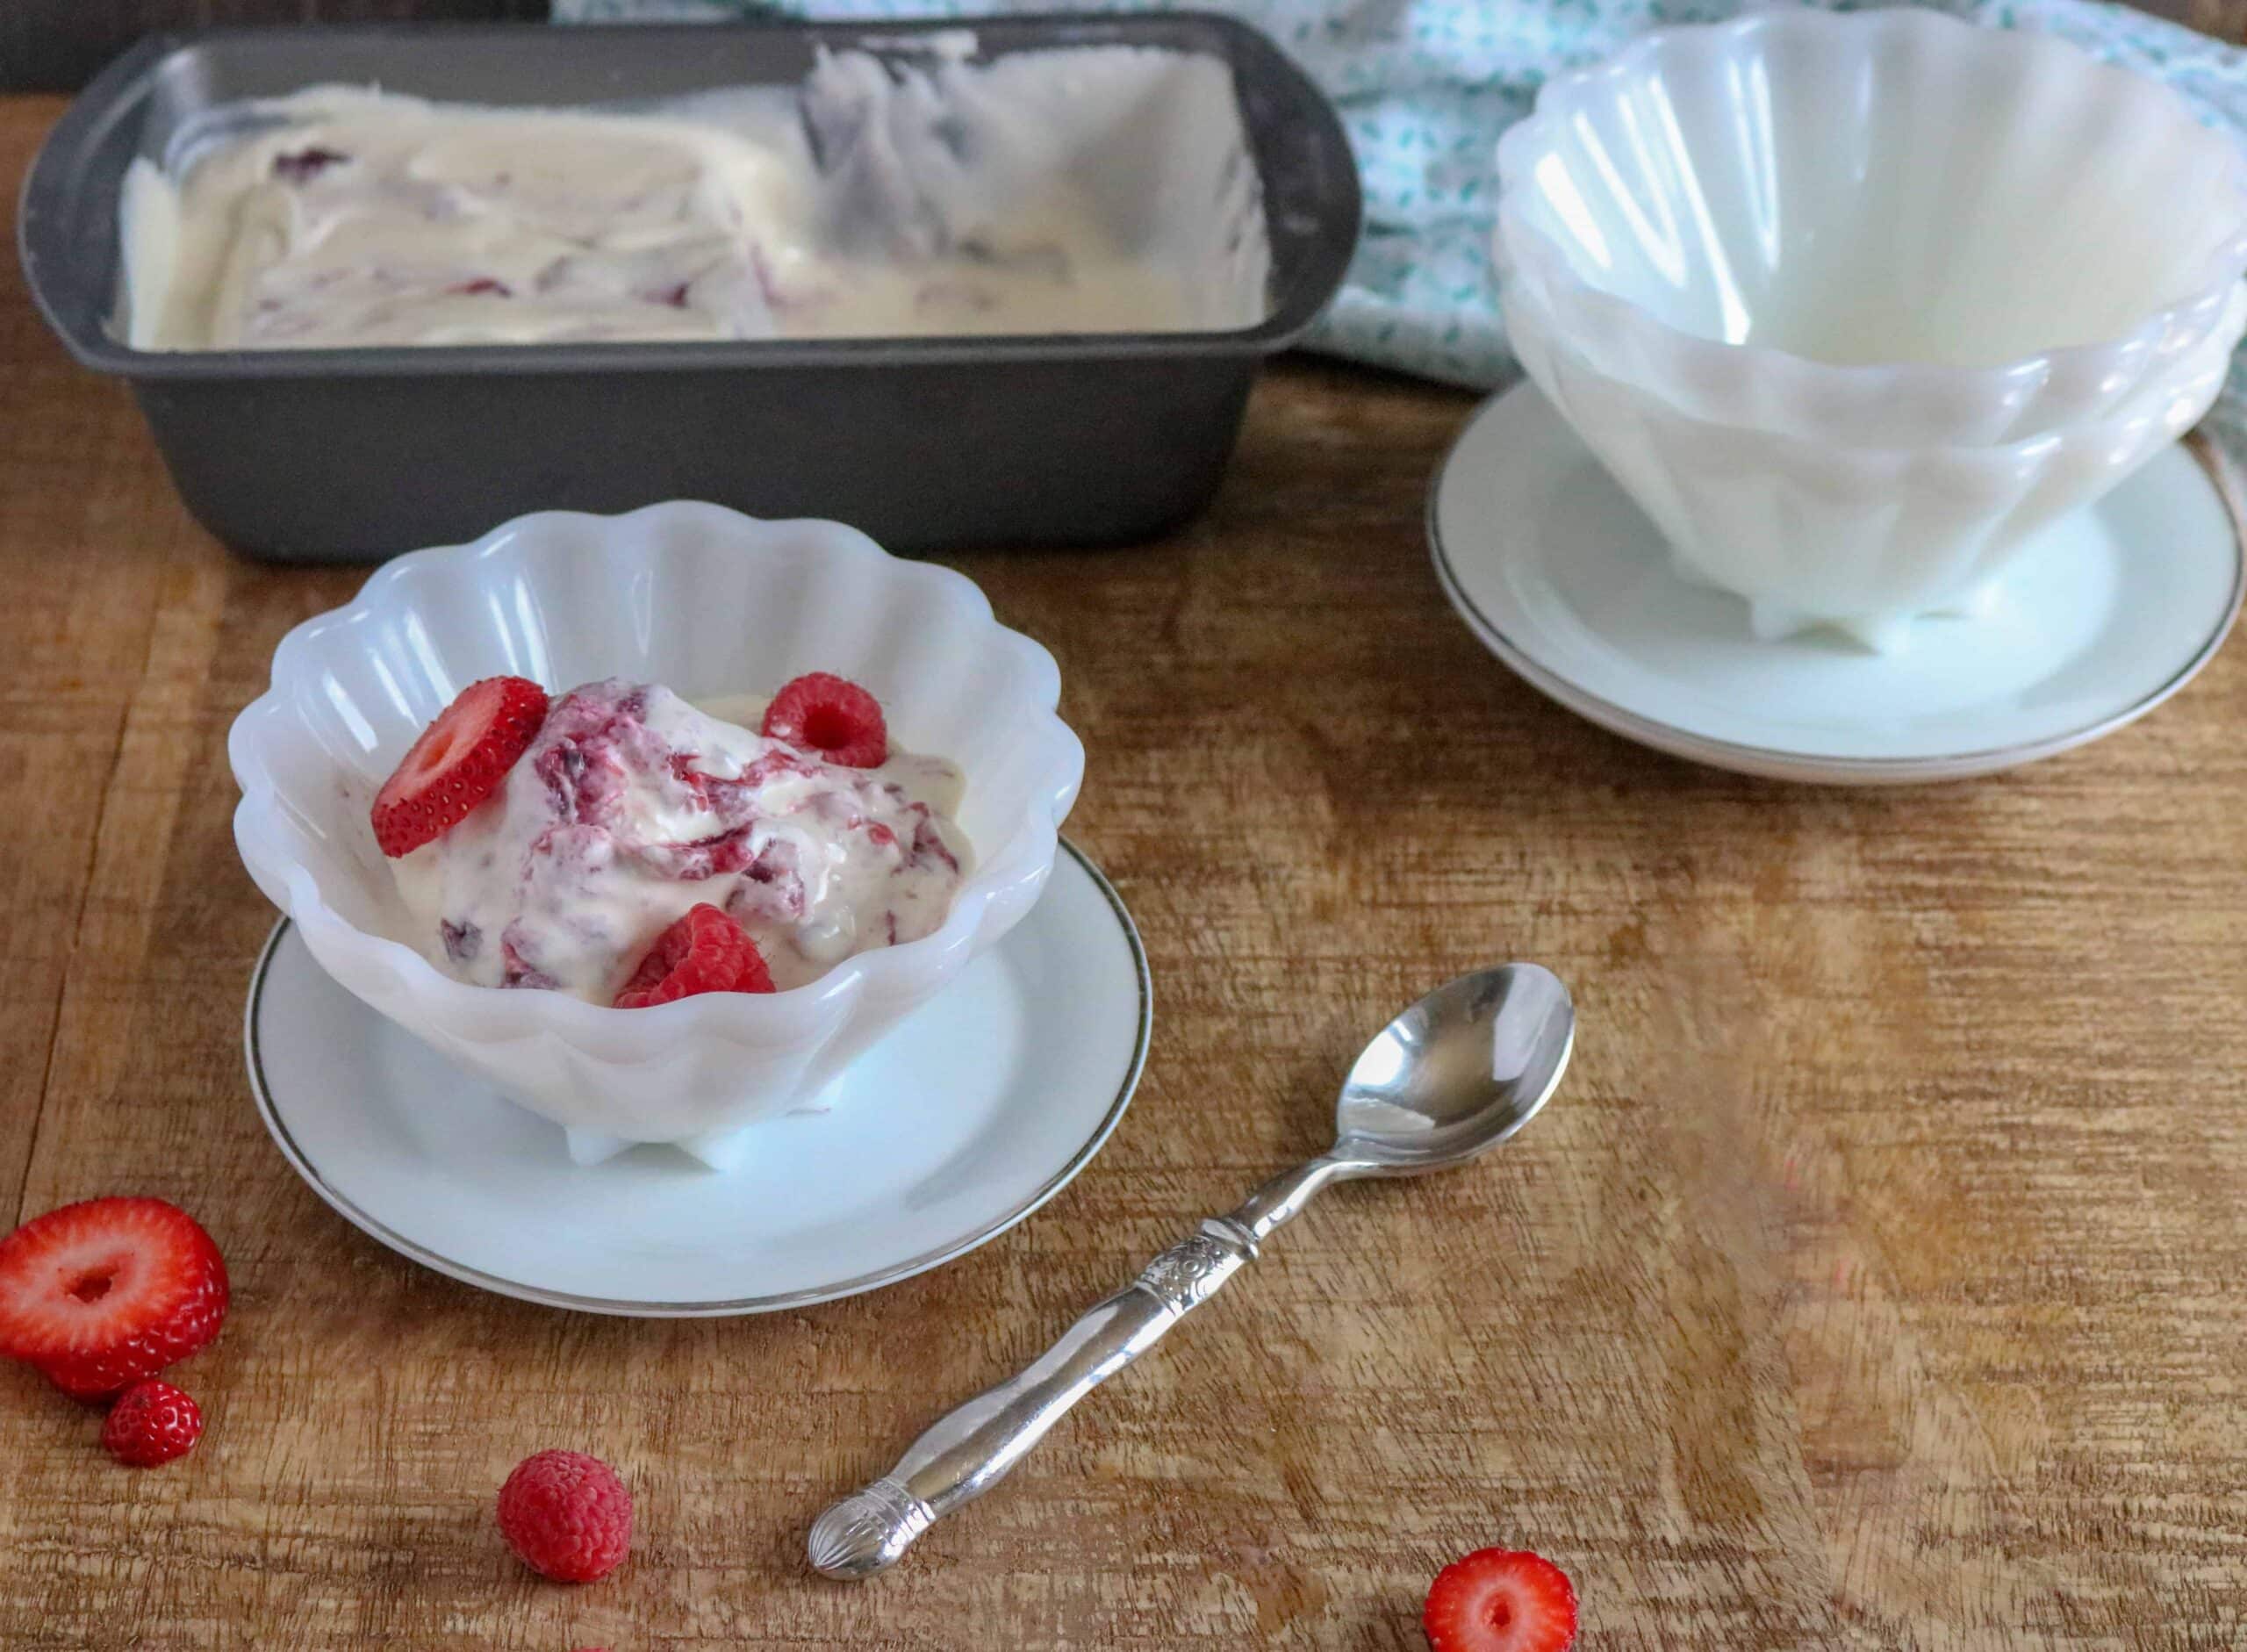 Berry Pie No-Churn Ice Cream in a white scalloped bowl and a white saucer sitting on a wooden table next to a spoon, berry slices, a pan of Berry Pie No-Churn Ice Cream and scalloped white bowls